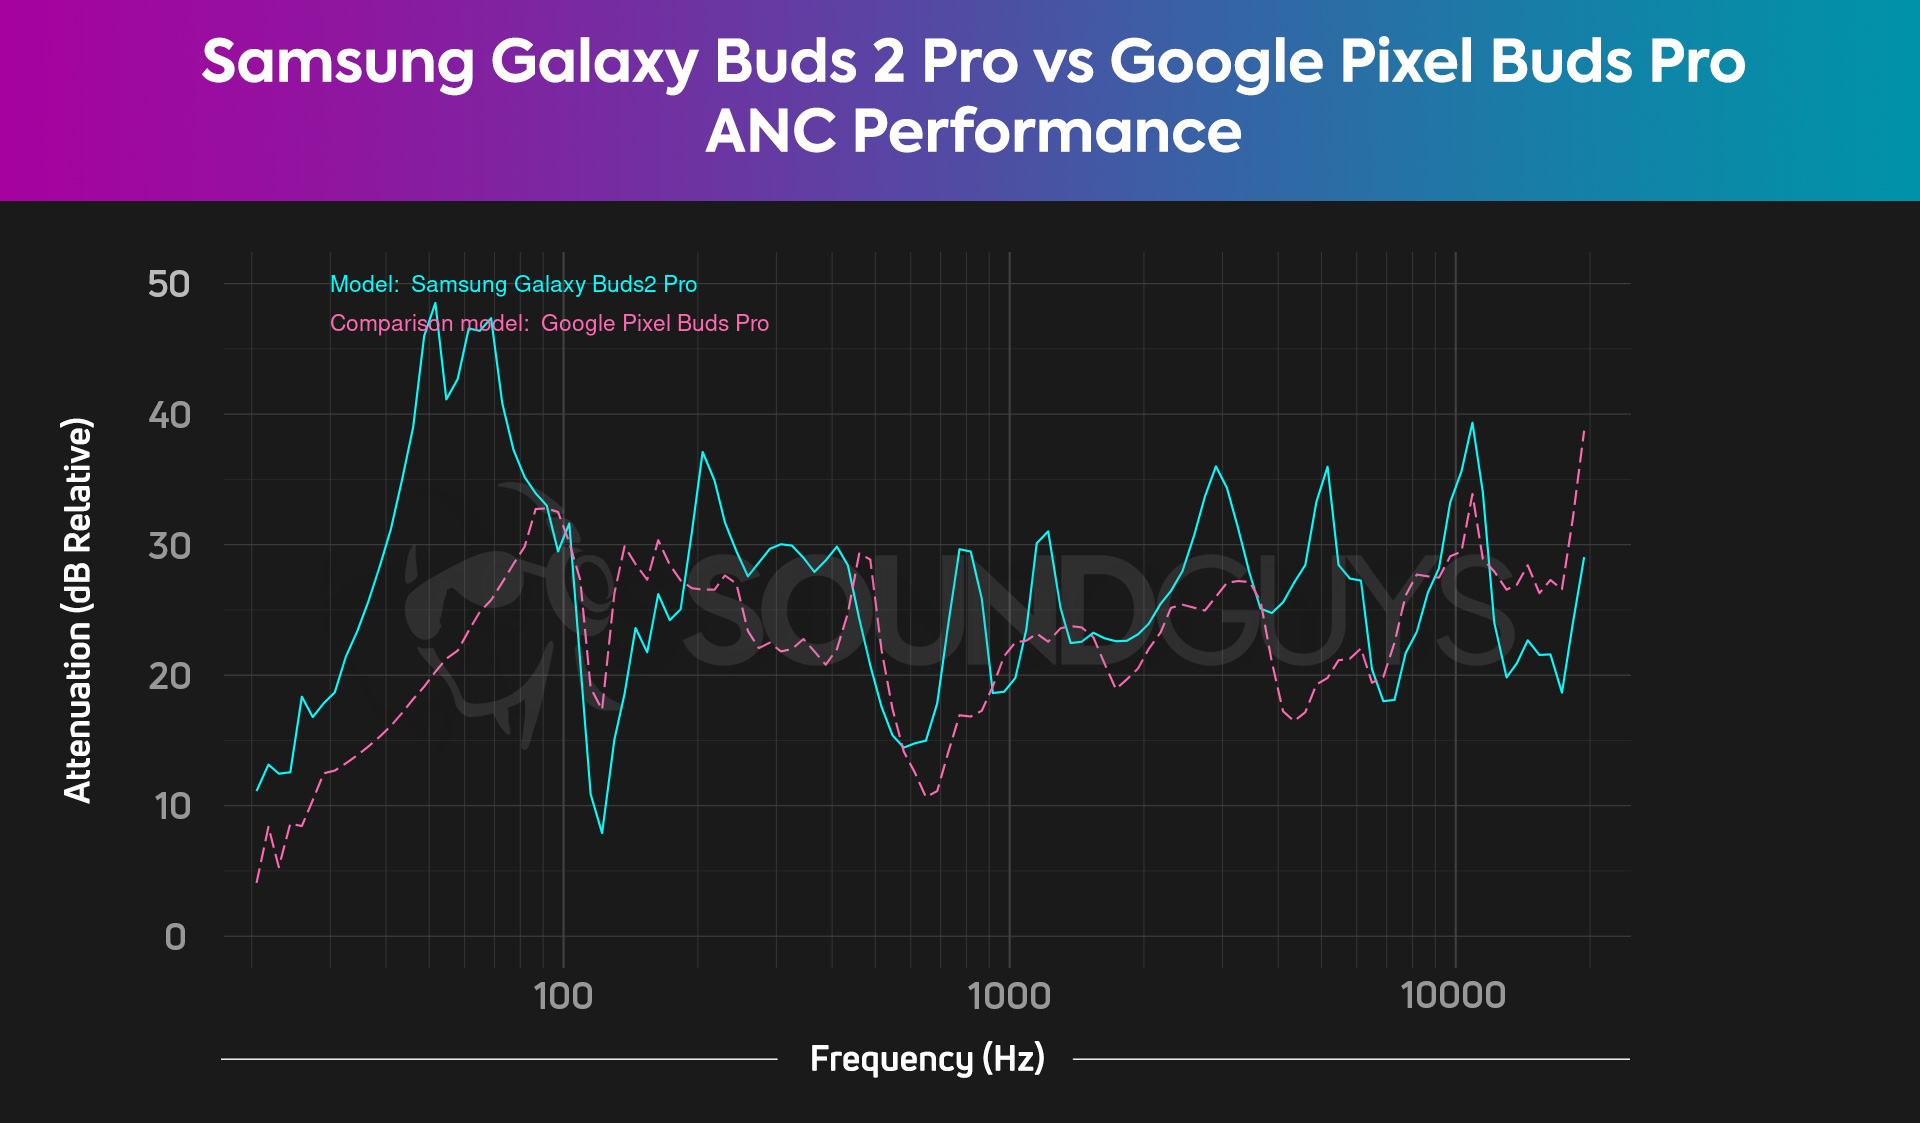 A chart compares the Samsung Galaxy Buds 2 Pro noise canceling to the Google Pixel Buds Pro, revealing the Galaxy Buds 2 Pro has better ANC.